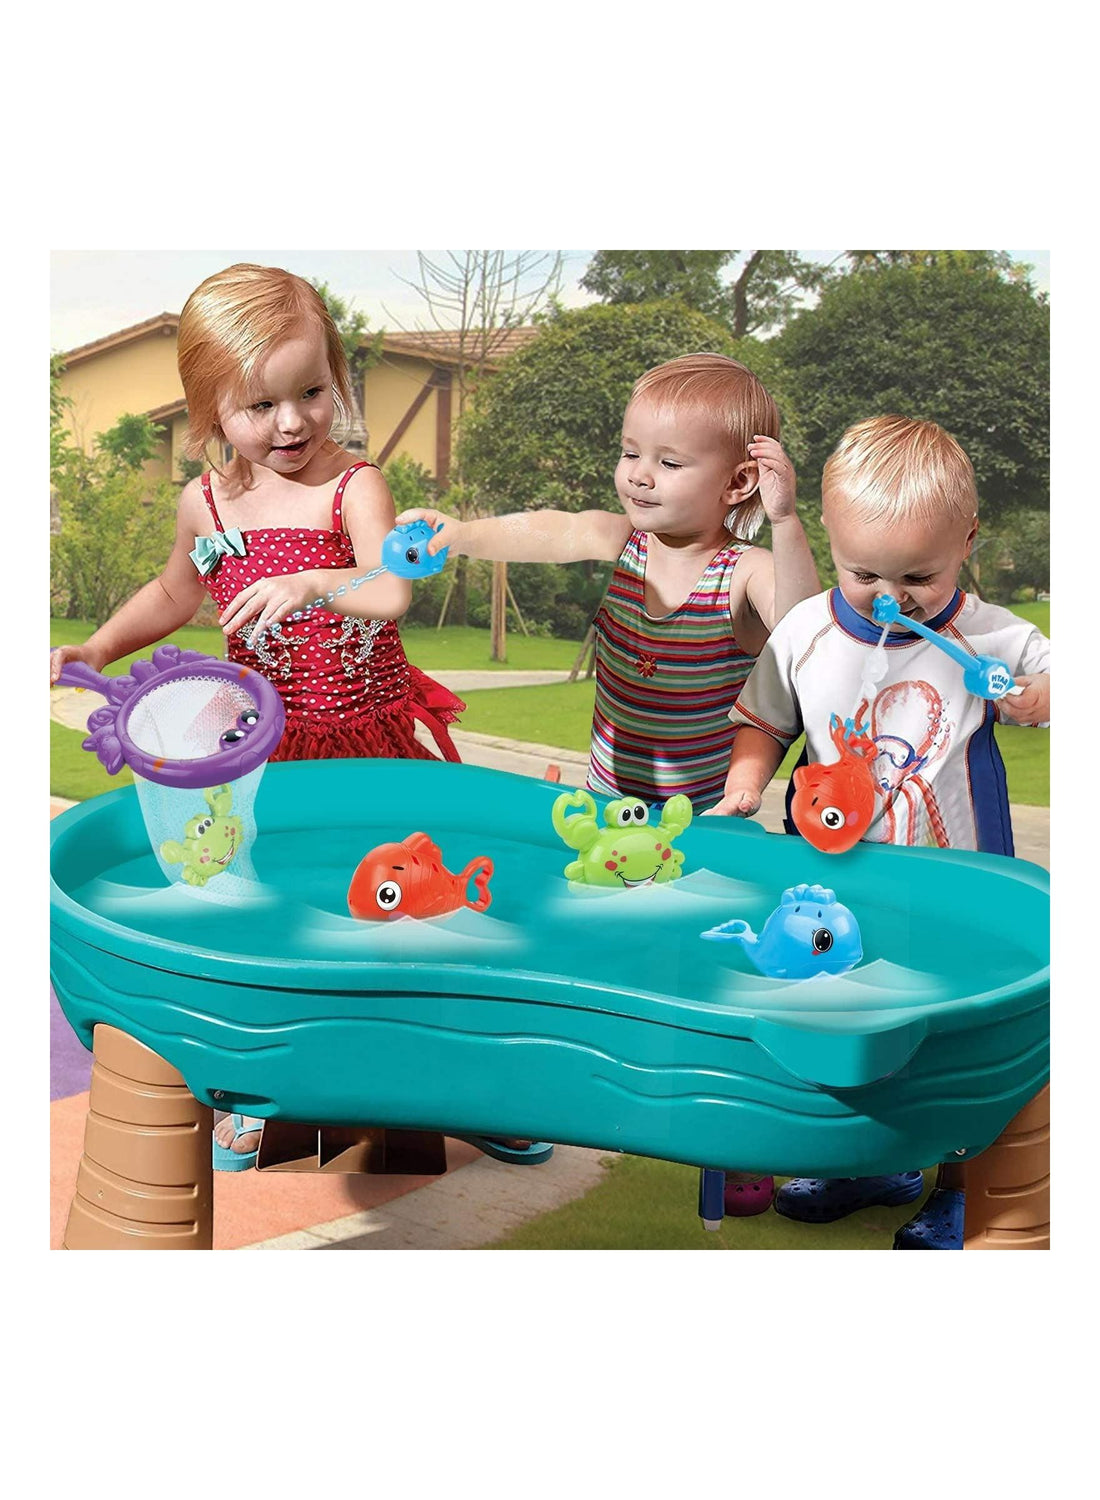 Toddler Bath Toys, Fishing Games With Fish Net